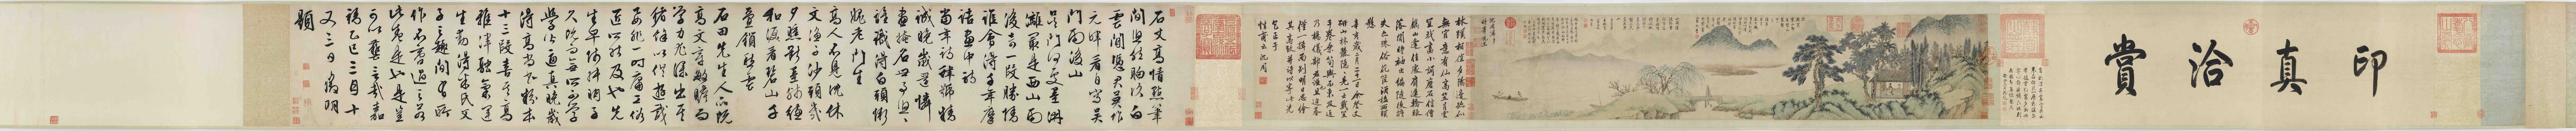 Shen Zhou 沈周 (1427–1509), A Spring Gathering, attached calligraphy by Shen Zhou 沈周 (1427–1509), frontispiece, inscription on front mounting, and three inscriptions on the painting by Hongli, the Qianlong emperor (1711–1799, reigned 1735–1796), colophon by Wen Zhengming 文徵明 (1470–1559), Ming dynasty, c. 1480?, Wu School, ink and color on paper, China, 26.5 x 131.1 cm (Freer Gallery of Art, Smithsonian Institution, Washington, DC: Purchase — Charles Lang Freer Endowment, F1934.1)